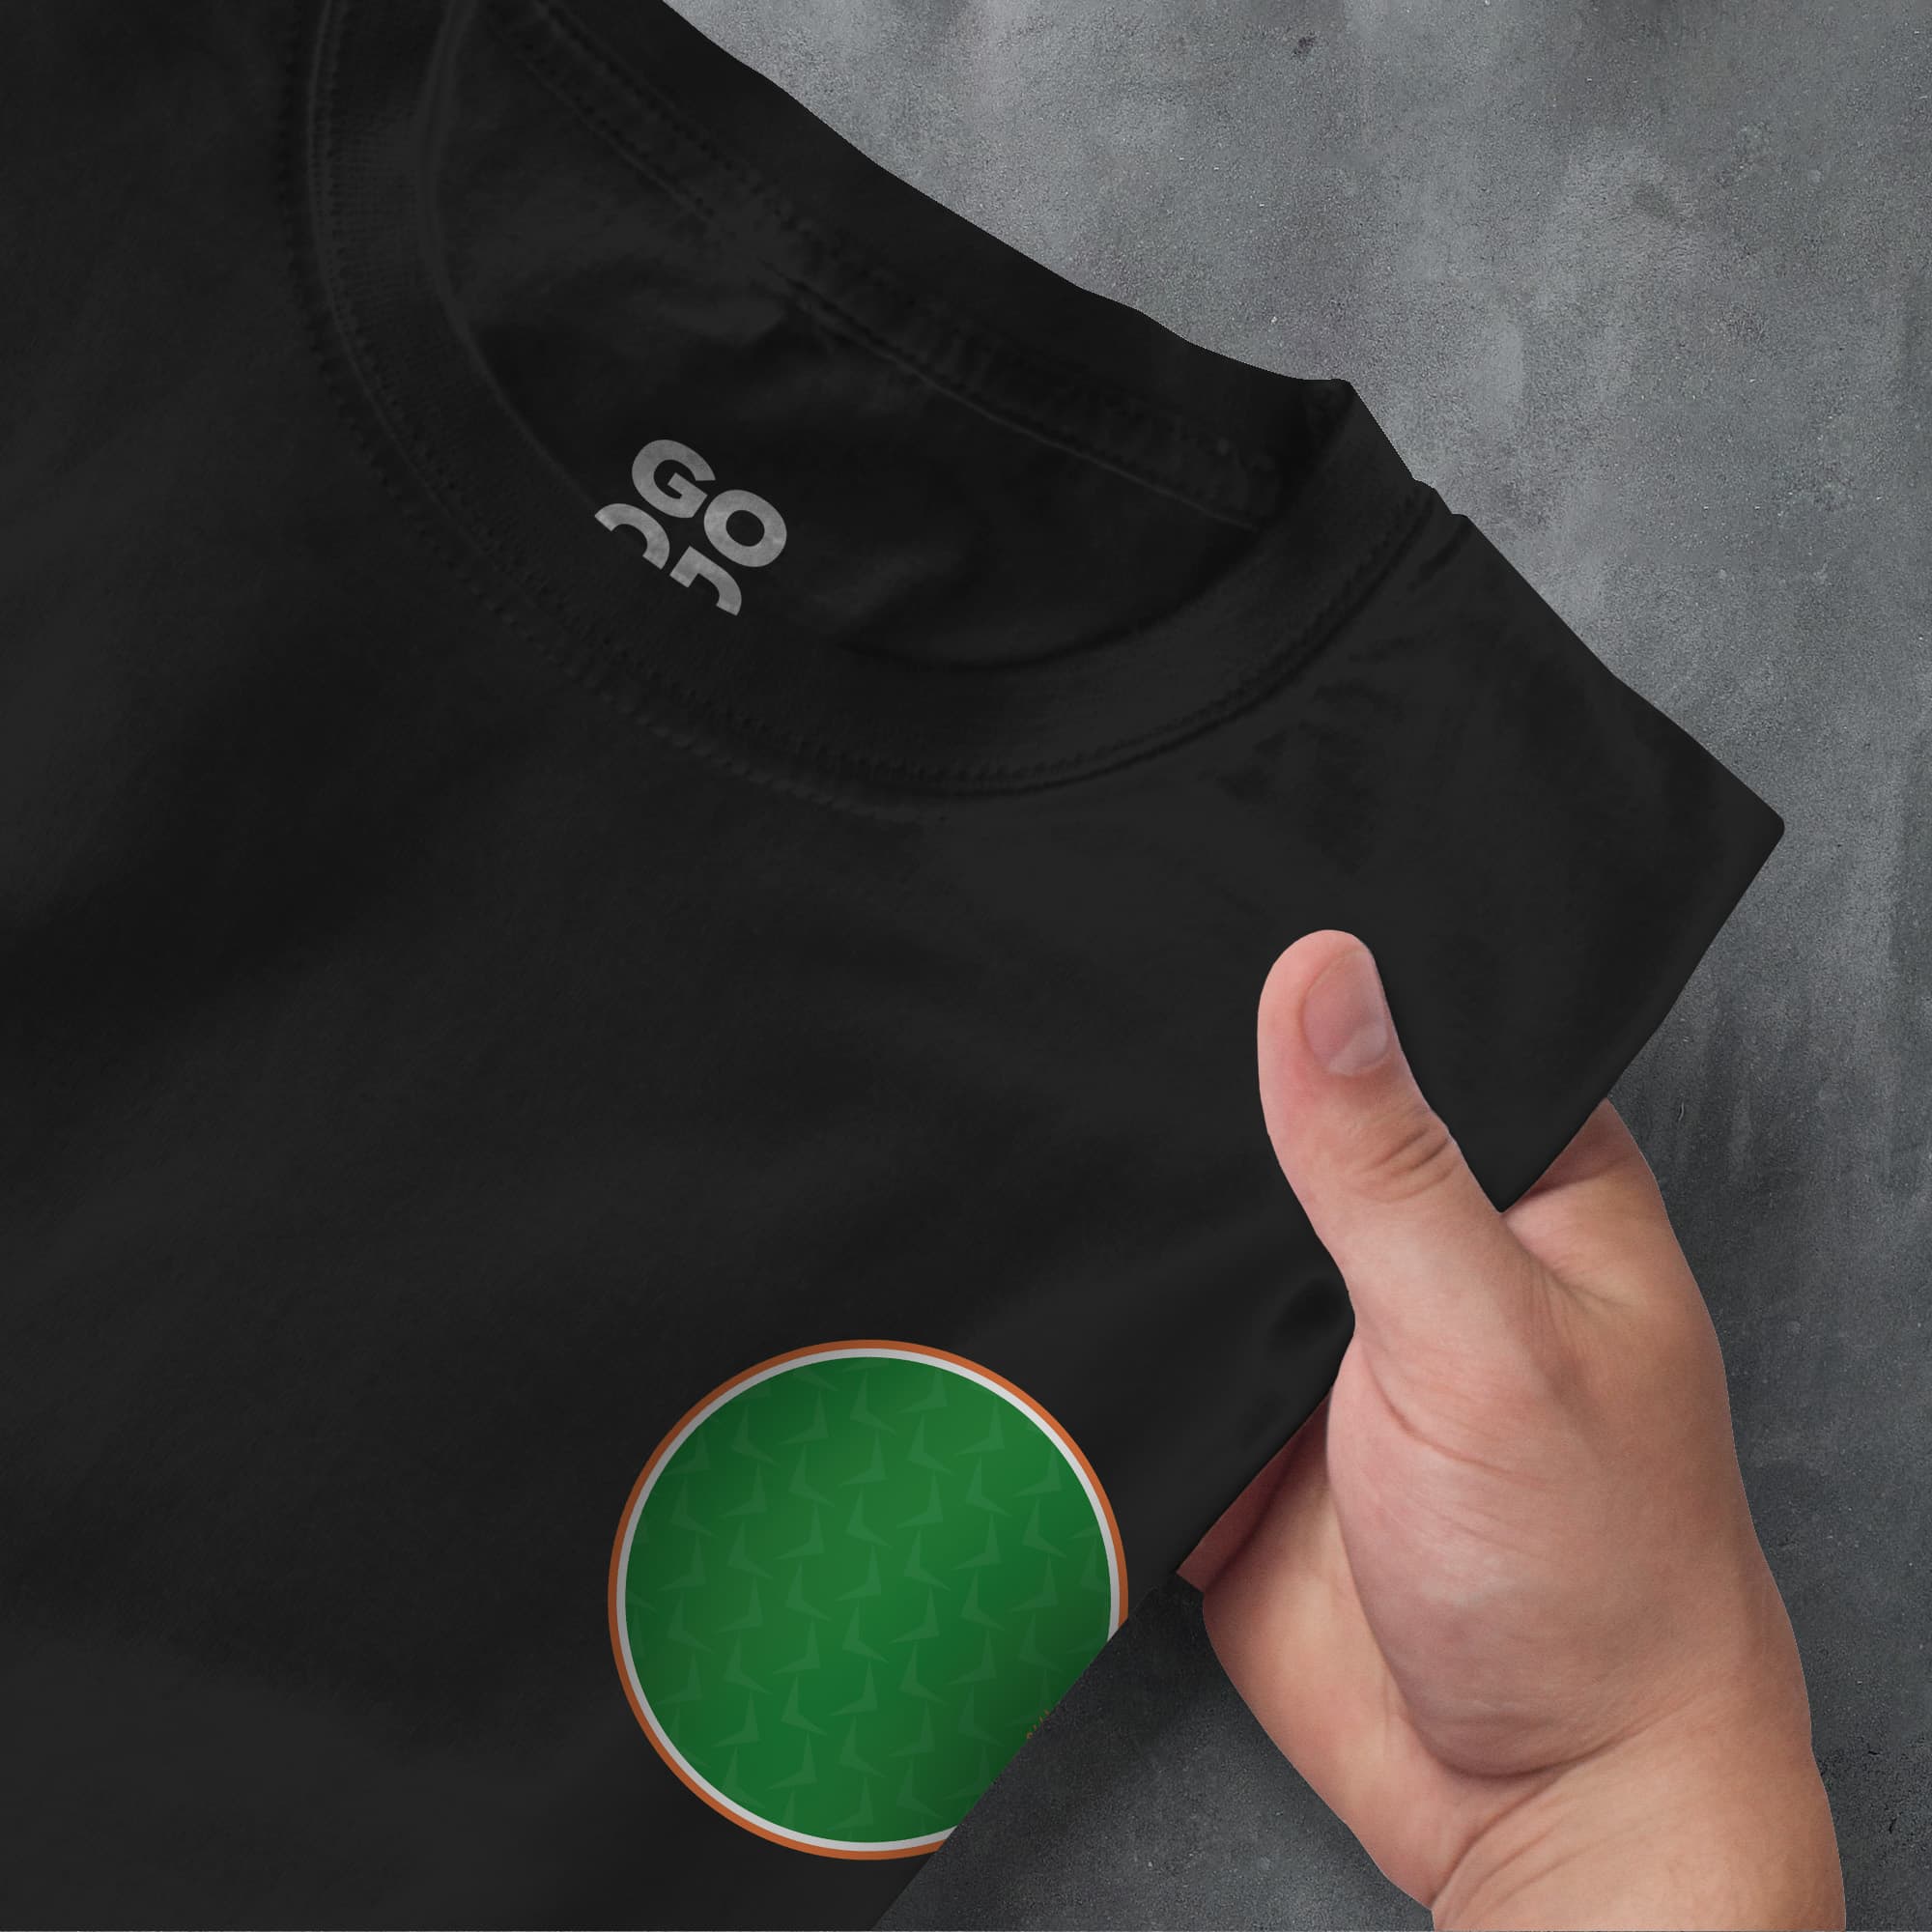 a person's hand pointing at a black t - shirt with a green circle